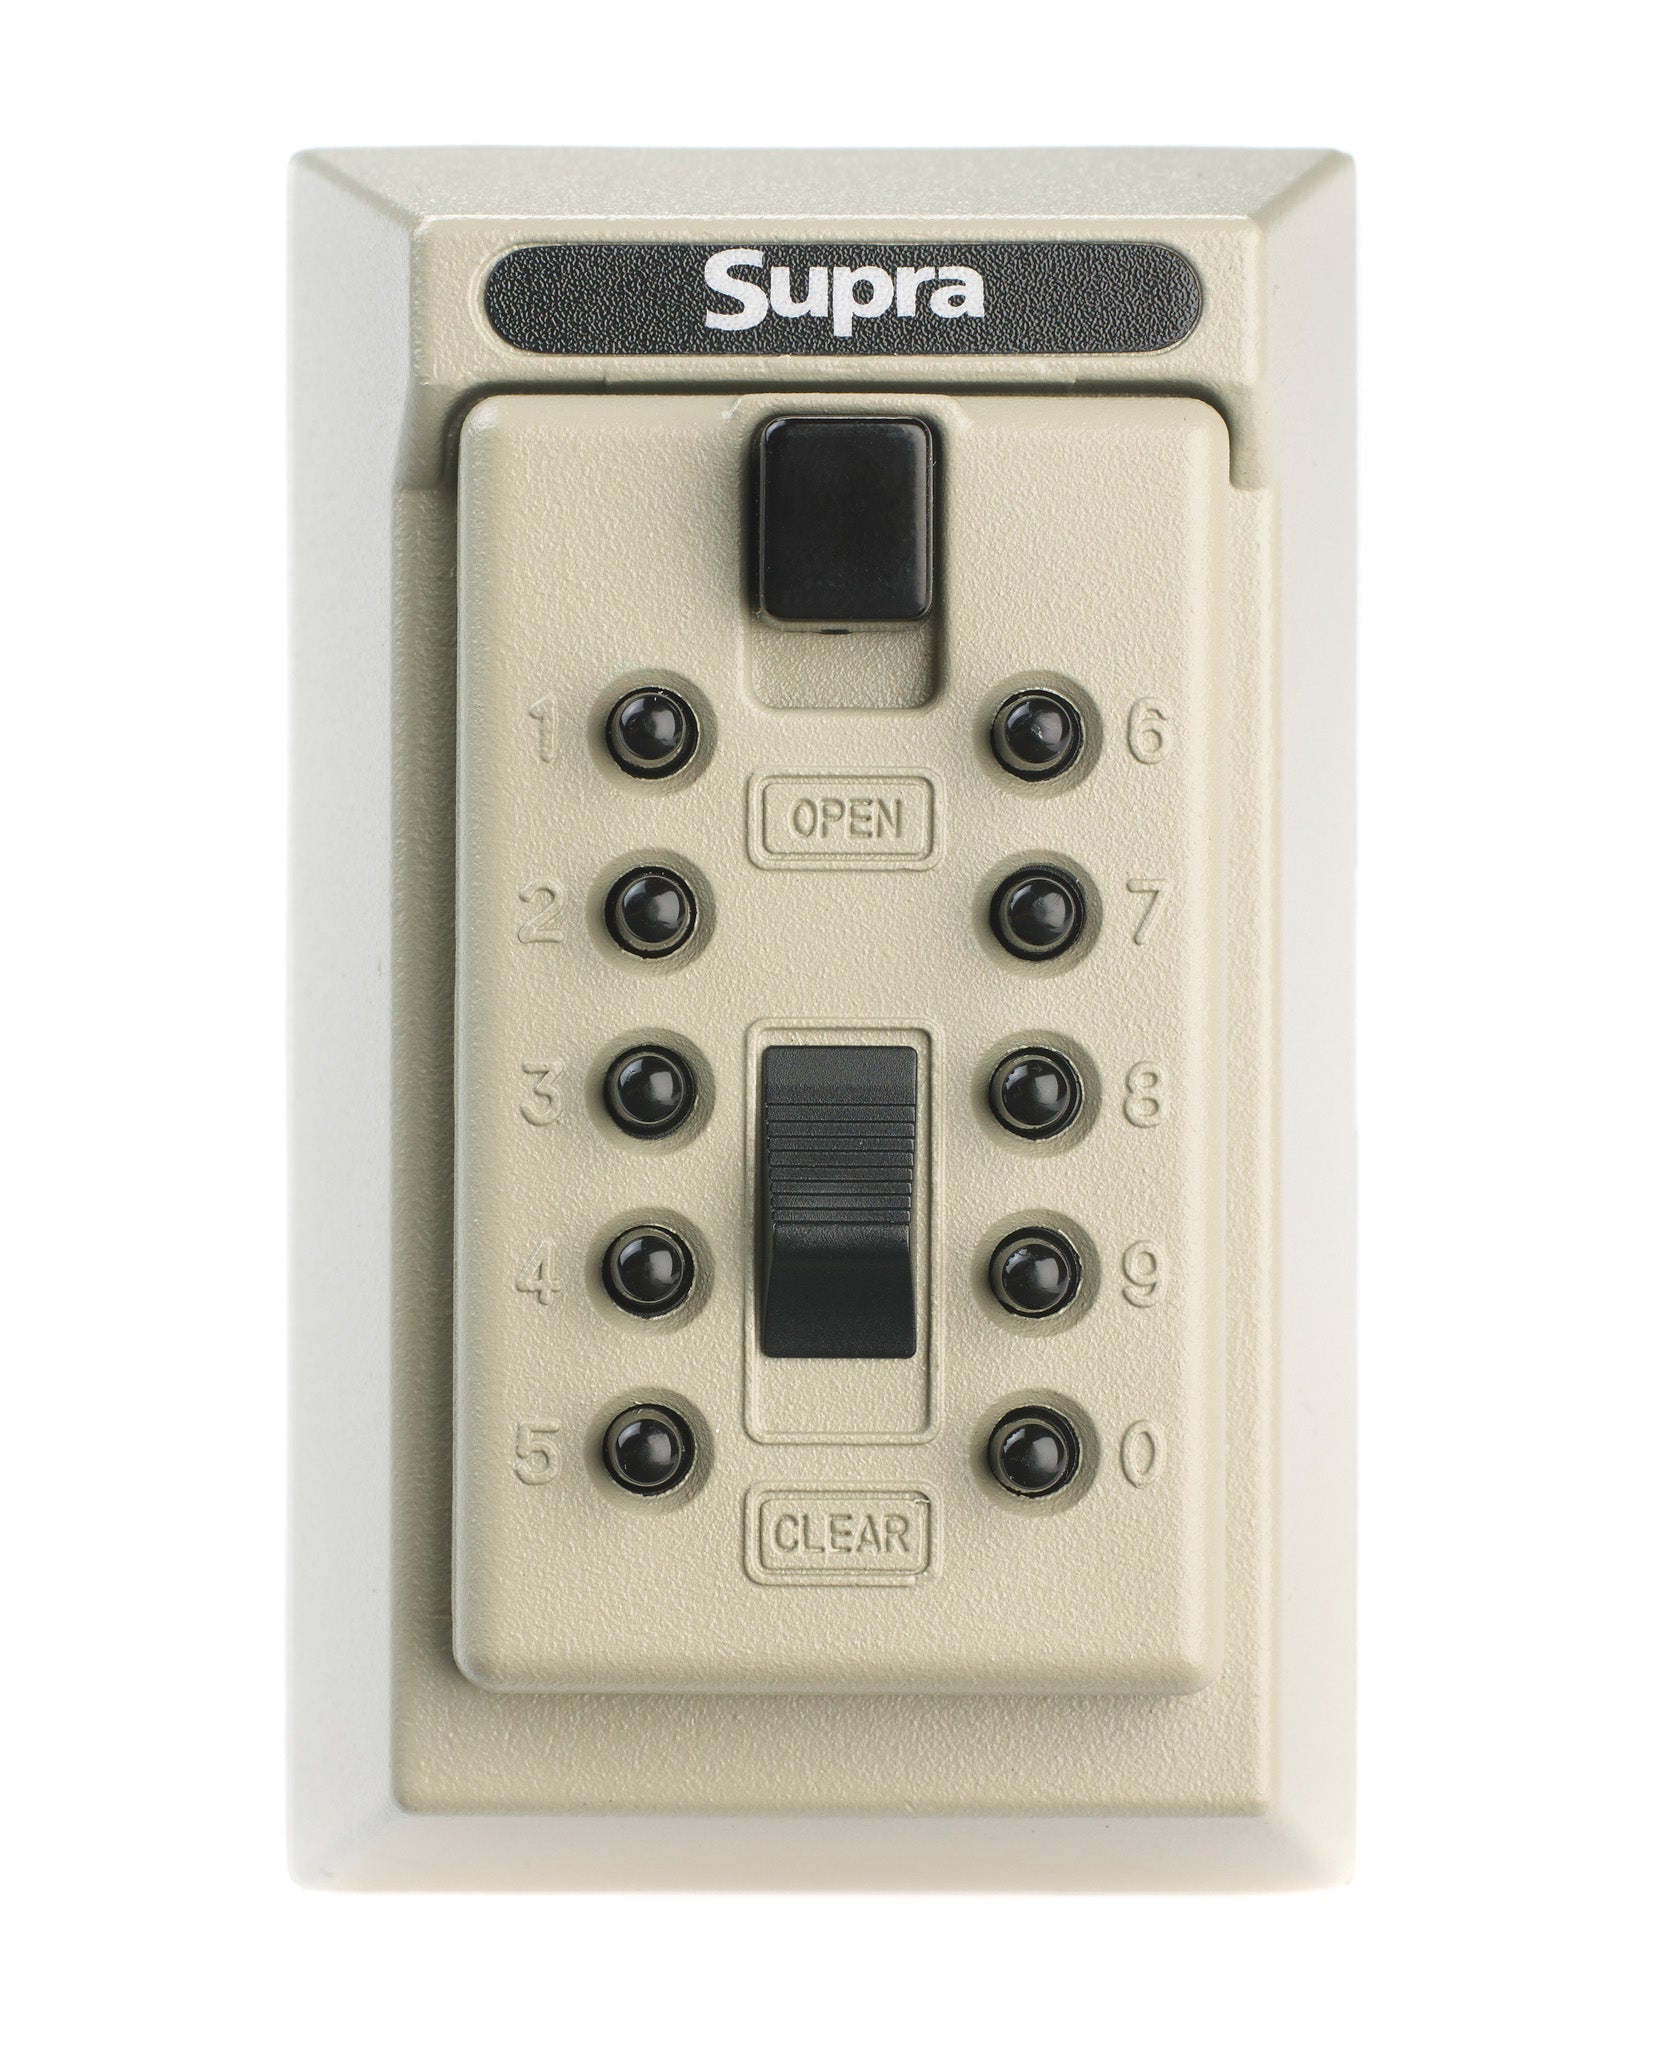 Close up of Supra S5 permanent key safe with digits 0-9 and clear button